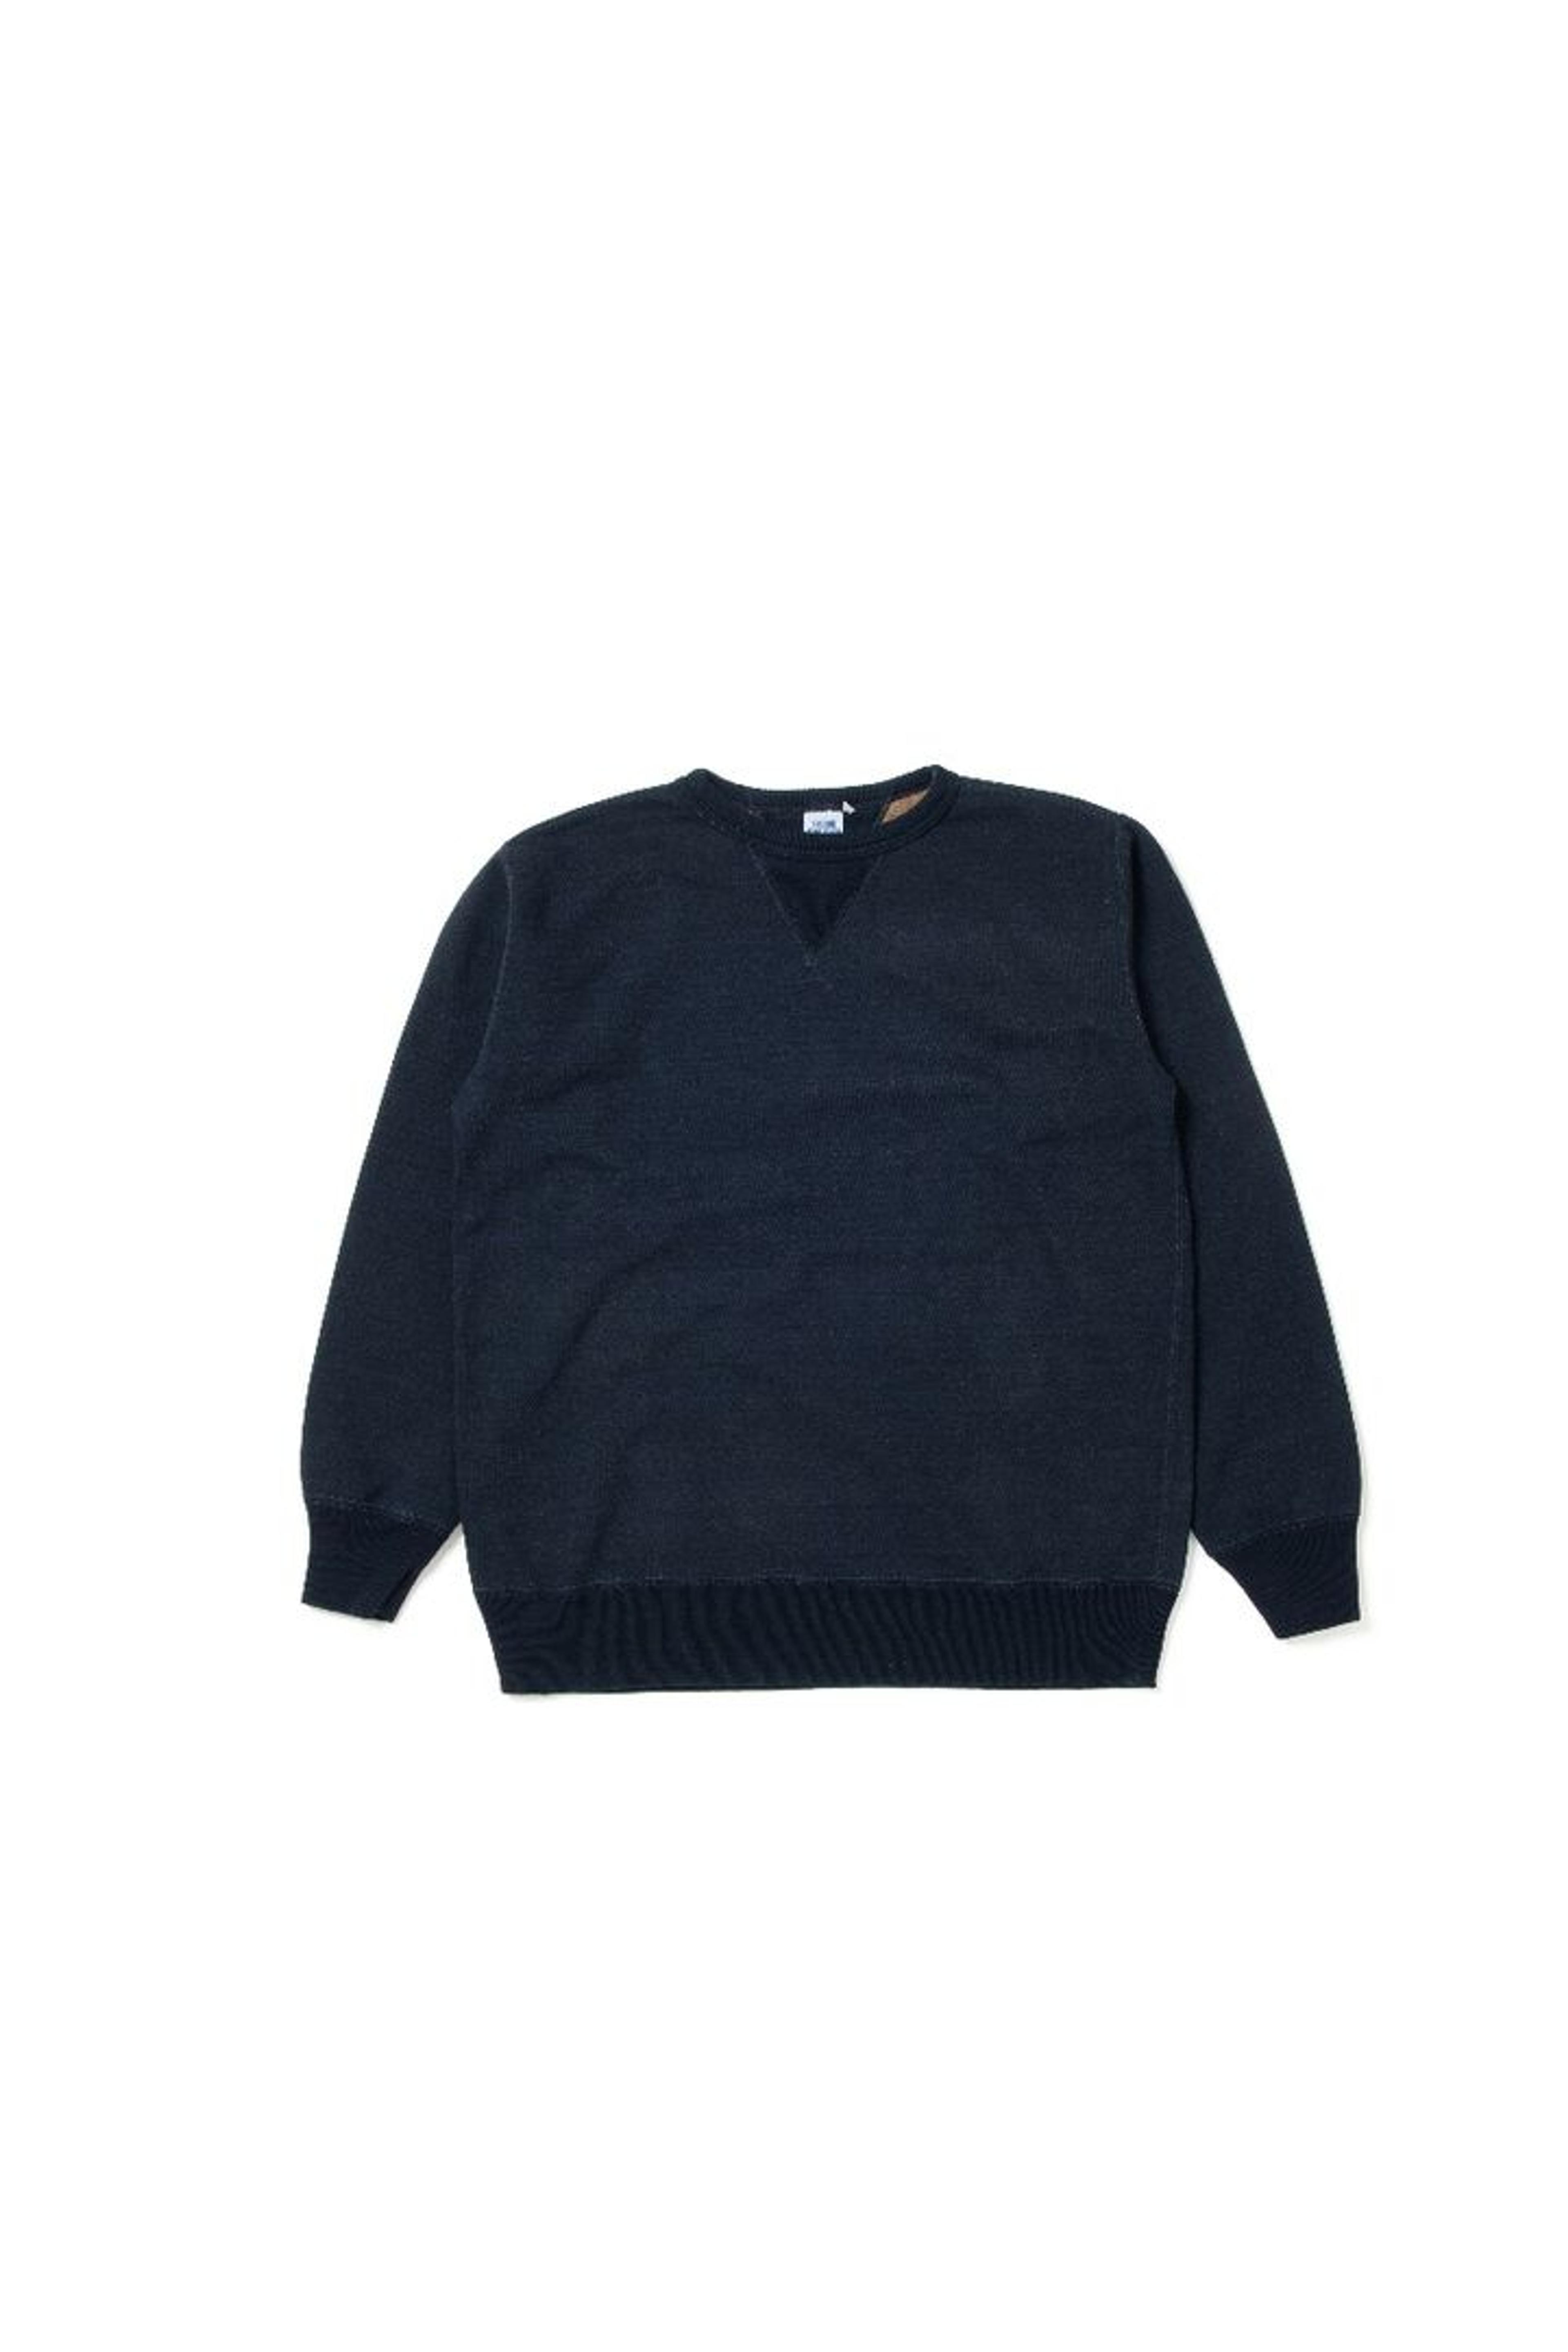 8121 Aishibu Dyed Sweatshirts (PRE-ORDER: Delivery date October 2023)